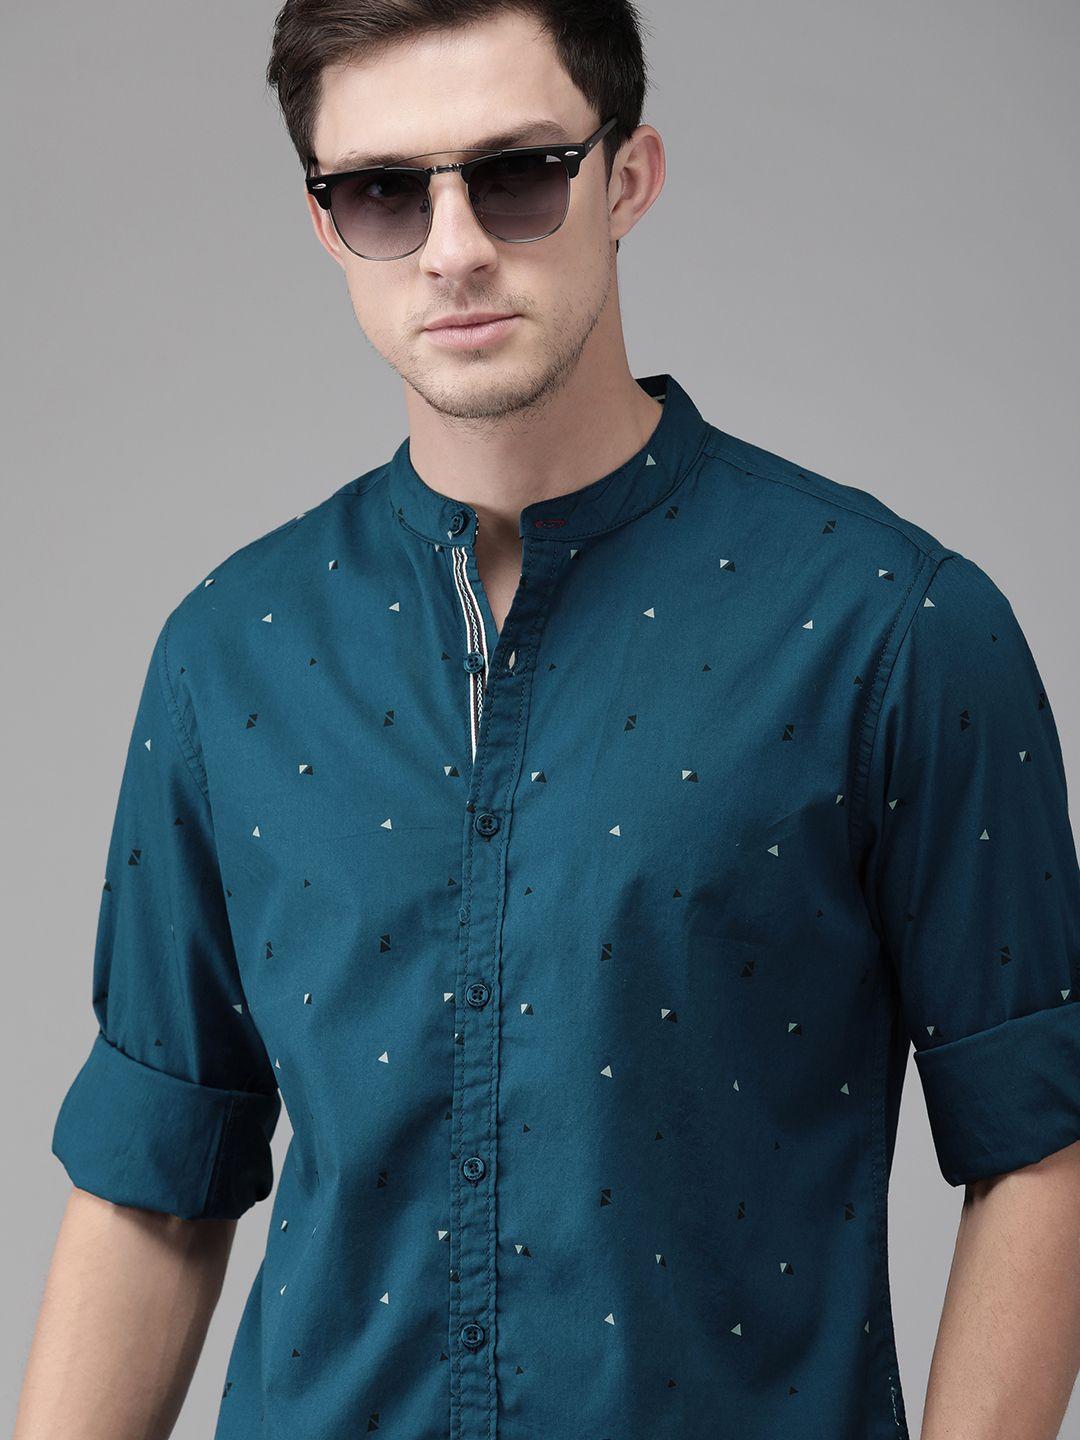 the roadster lifestyle co men teal blue & off-white regular fit printed sustainable casual shirt